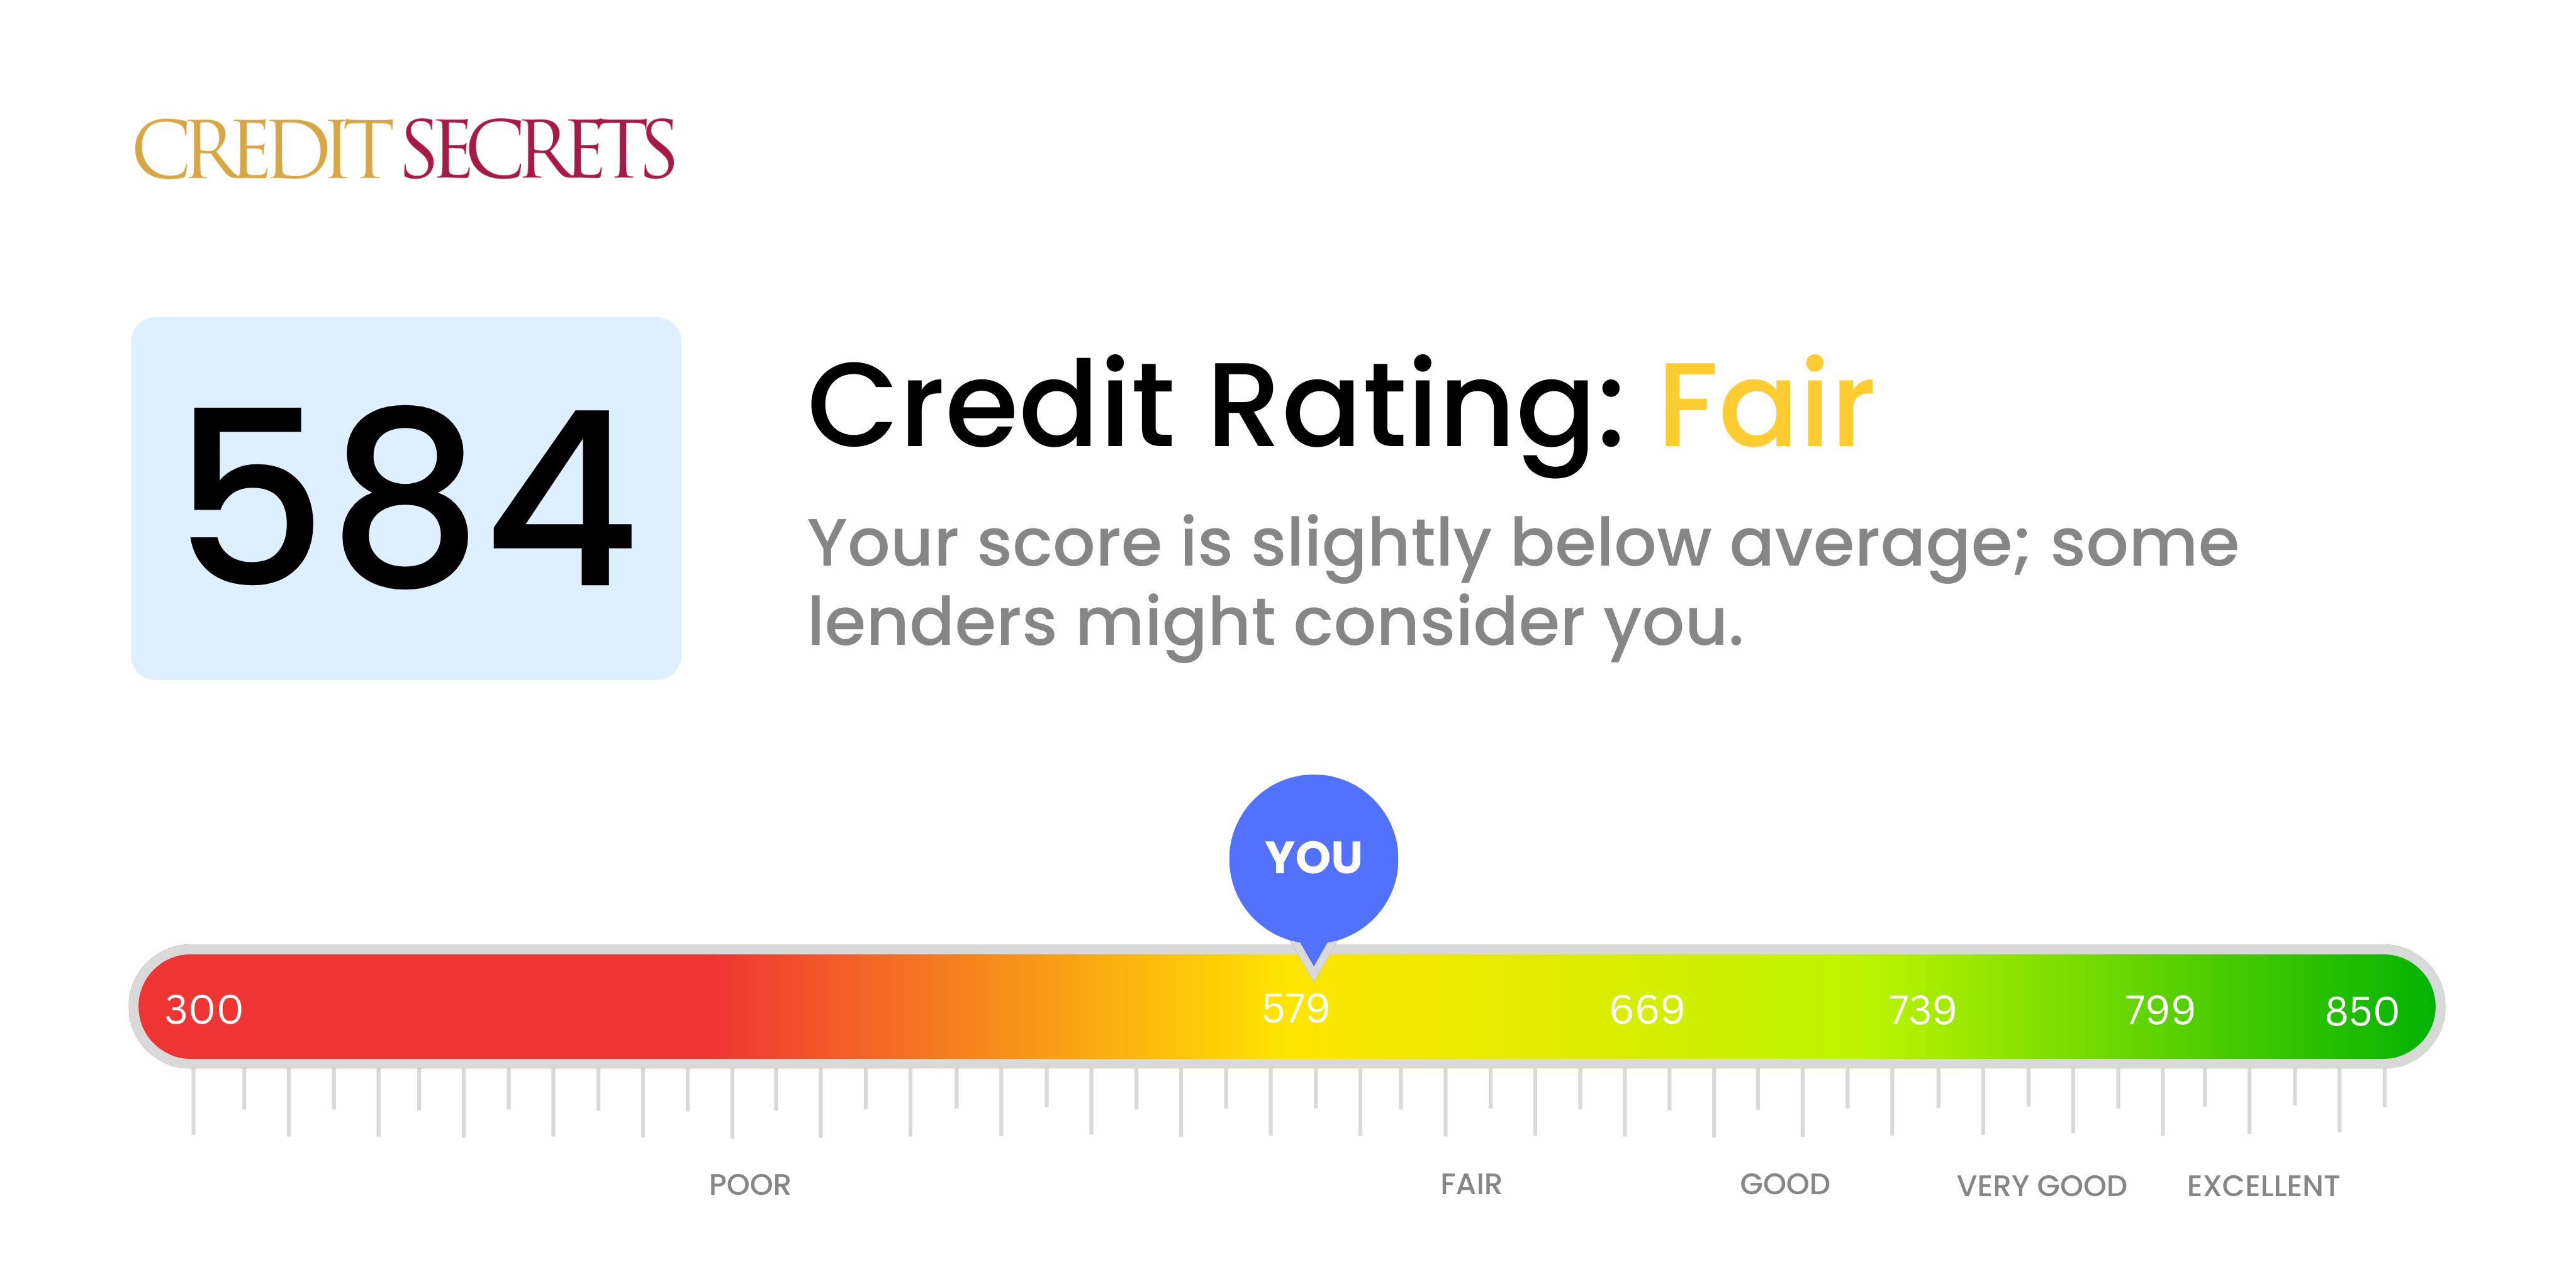 Is 584 a good credit score?